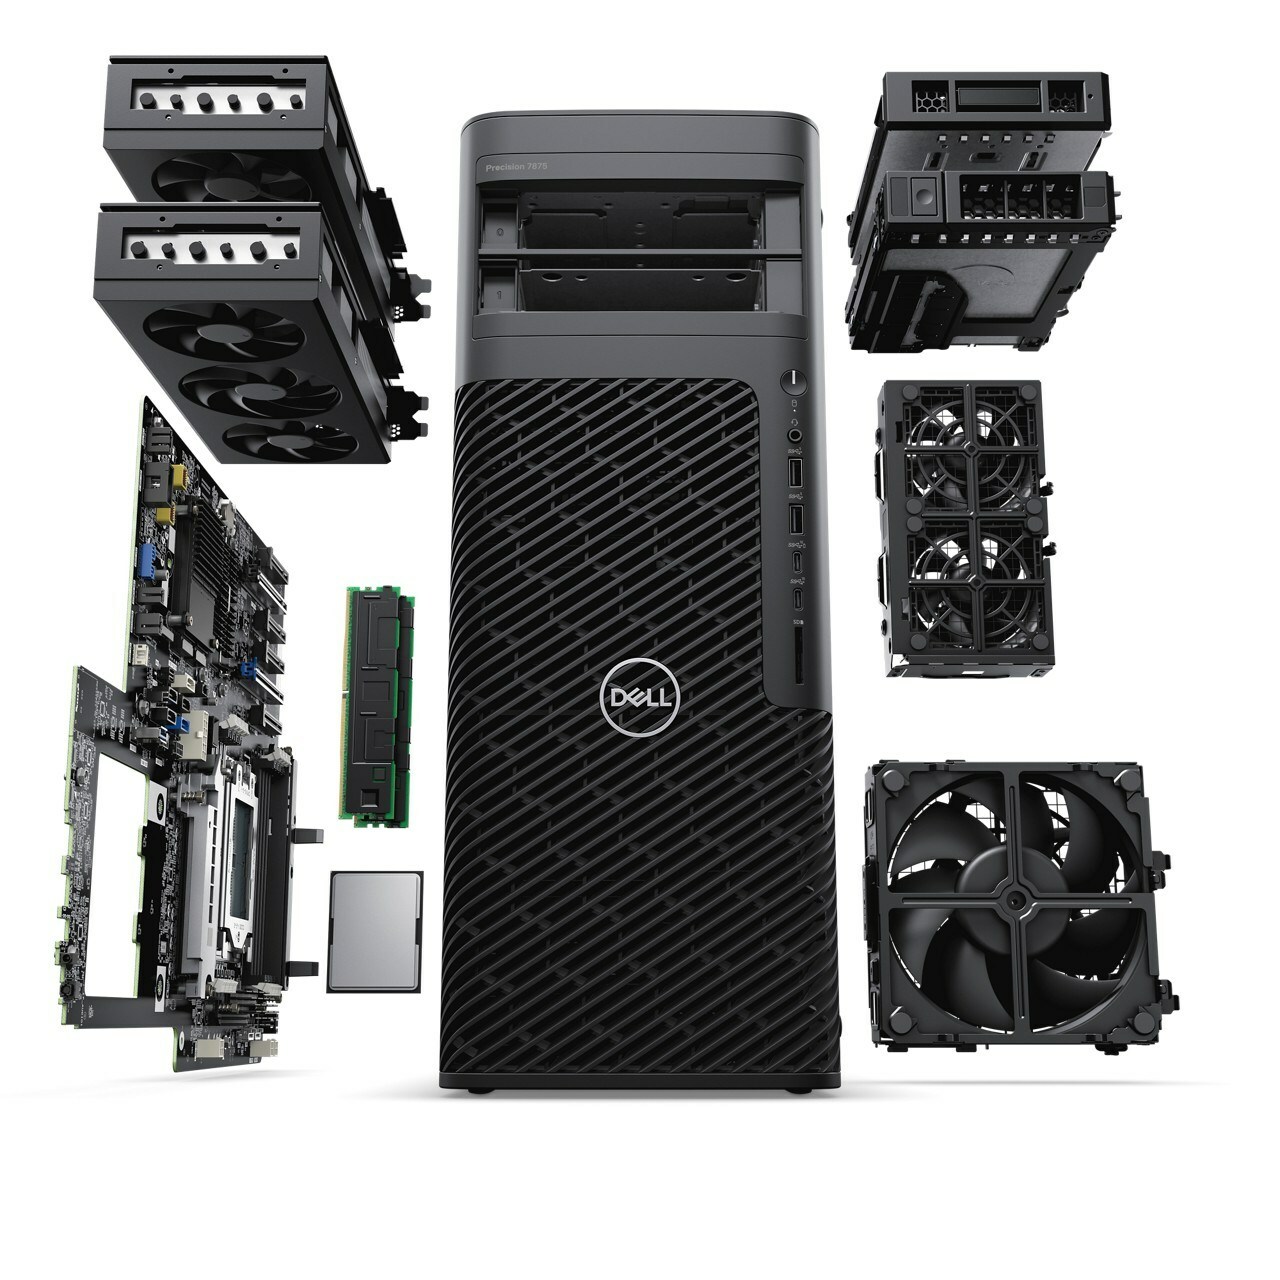 Meet Dell's newest workstation - featuring 96 cores